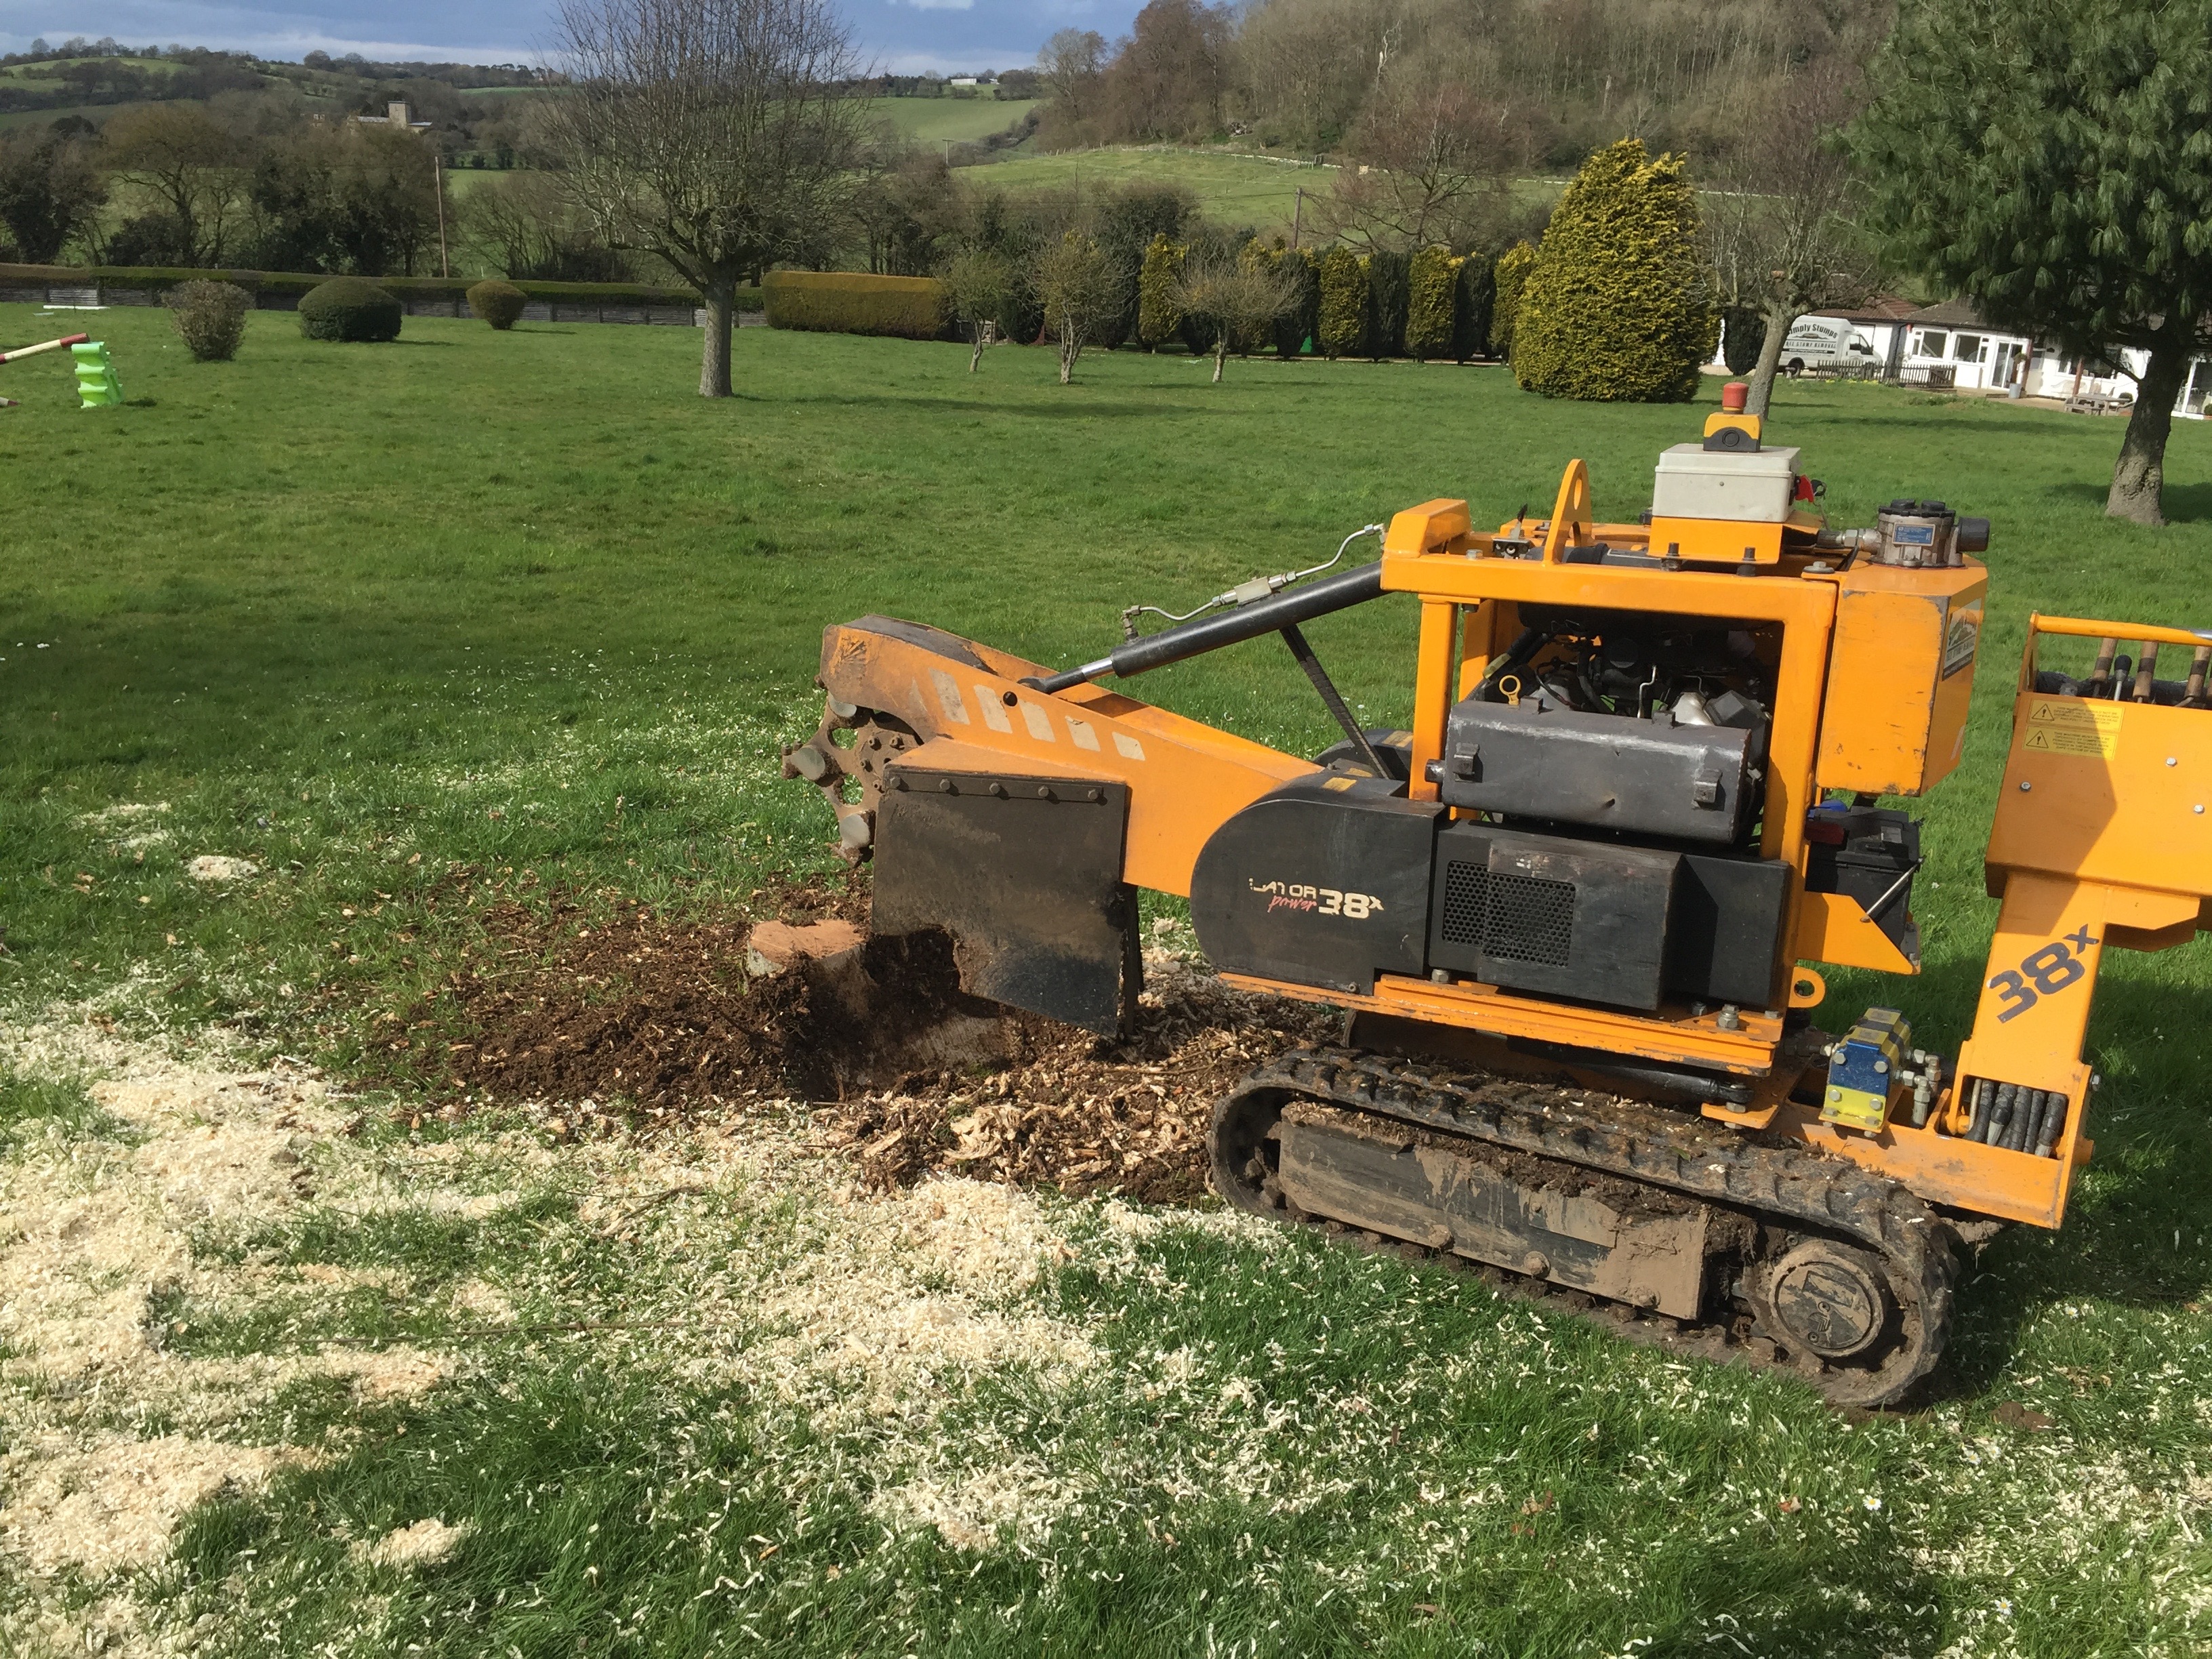 You are currently viewing Stump grinding Sycamore stumps in Radnage to protect horses.